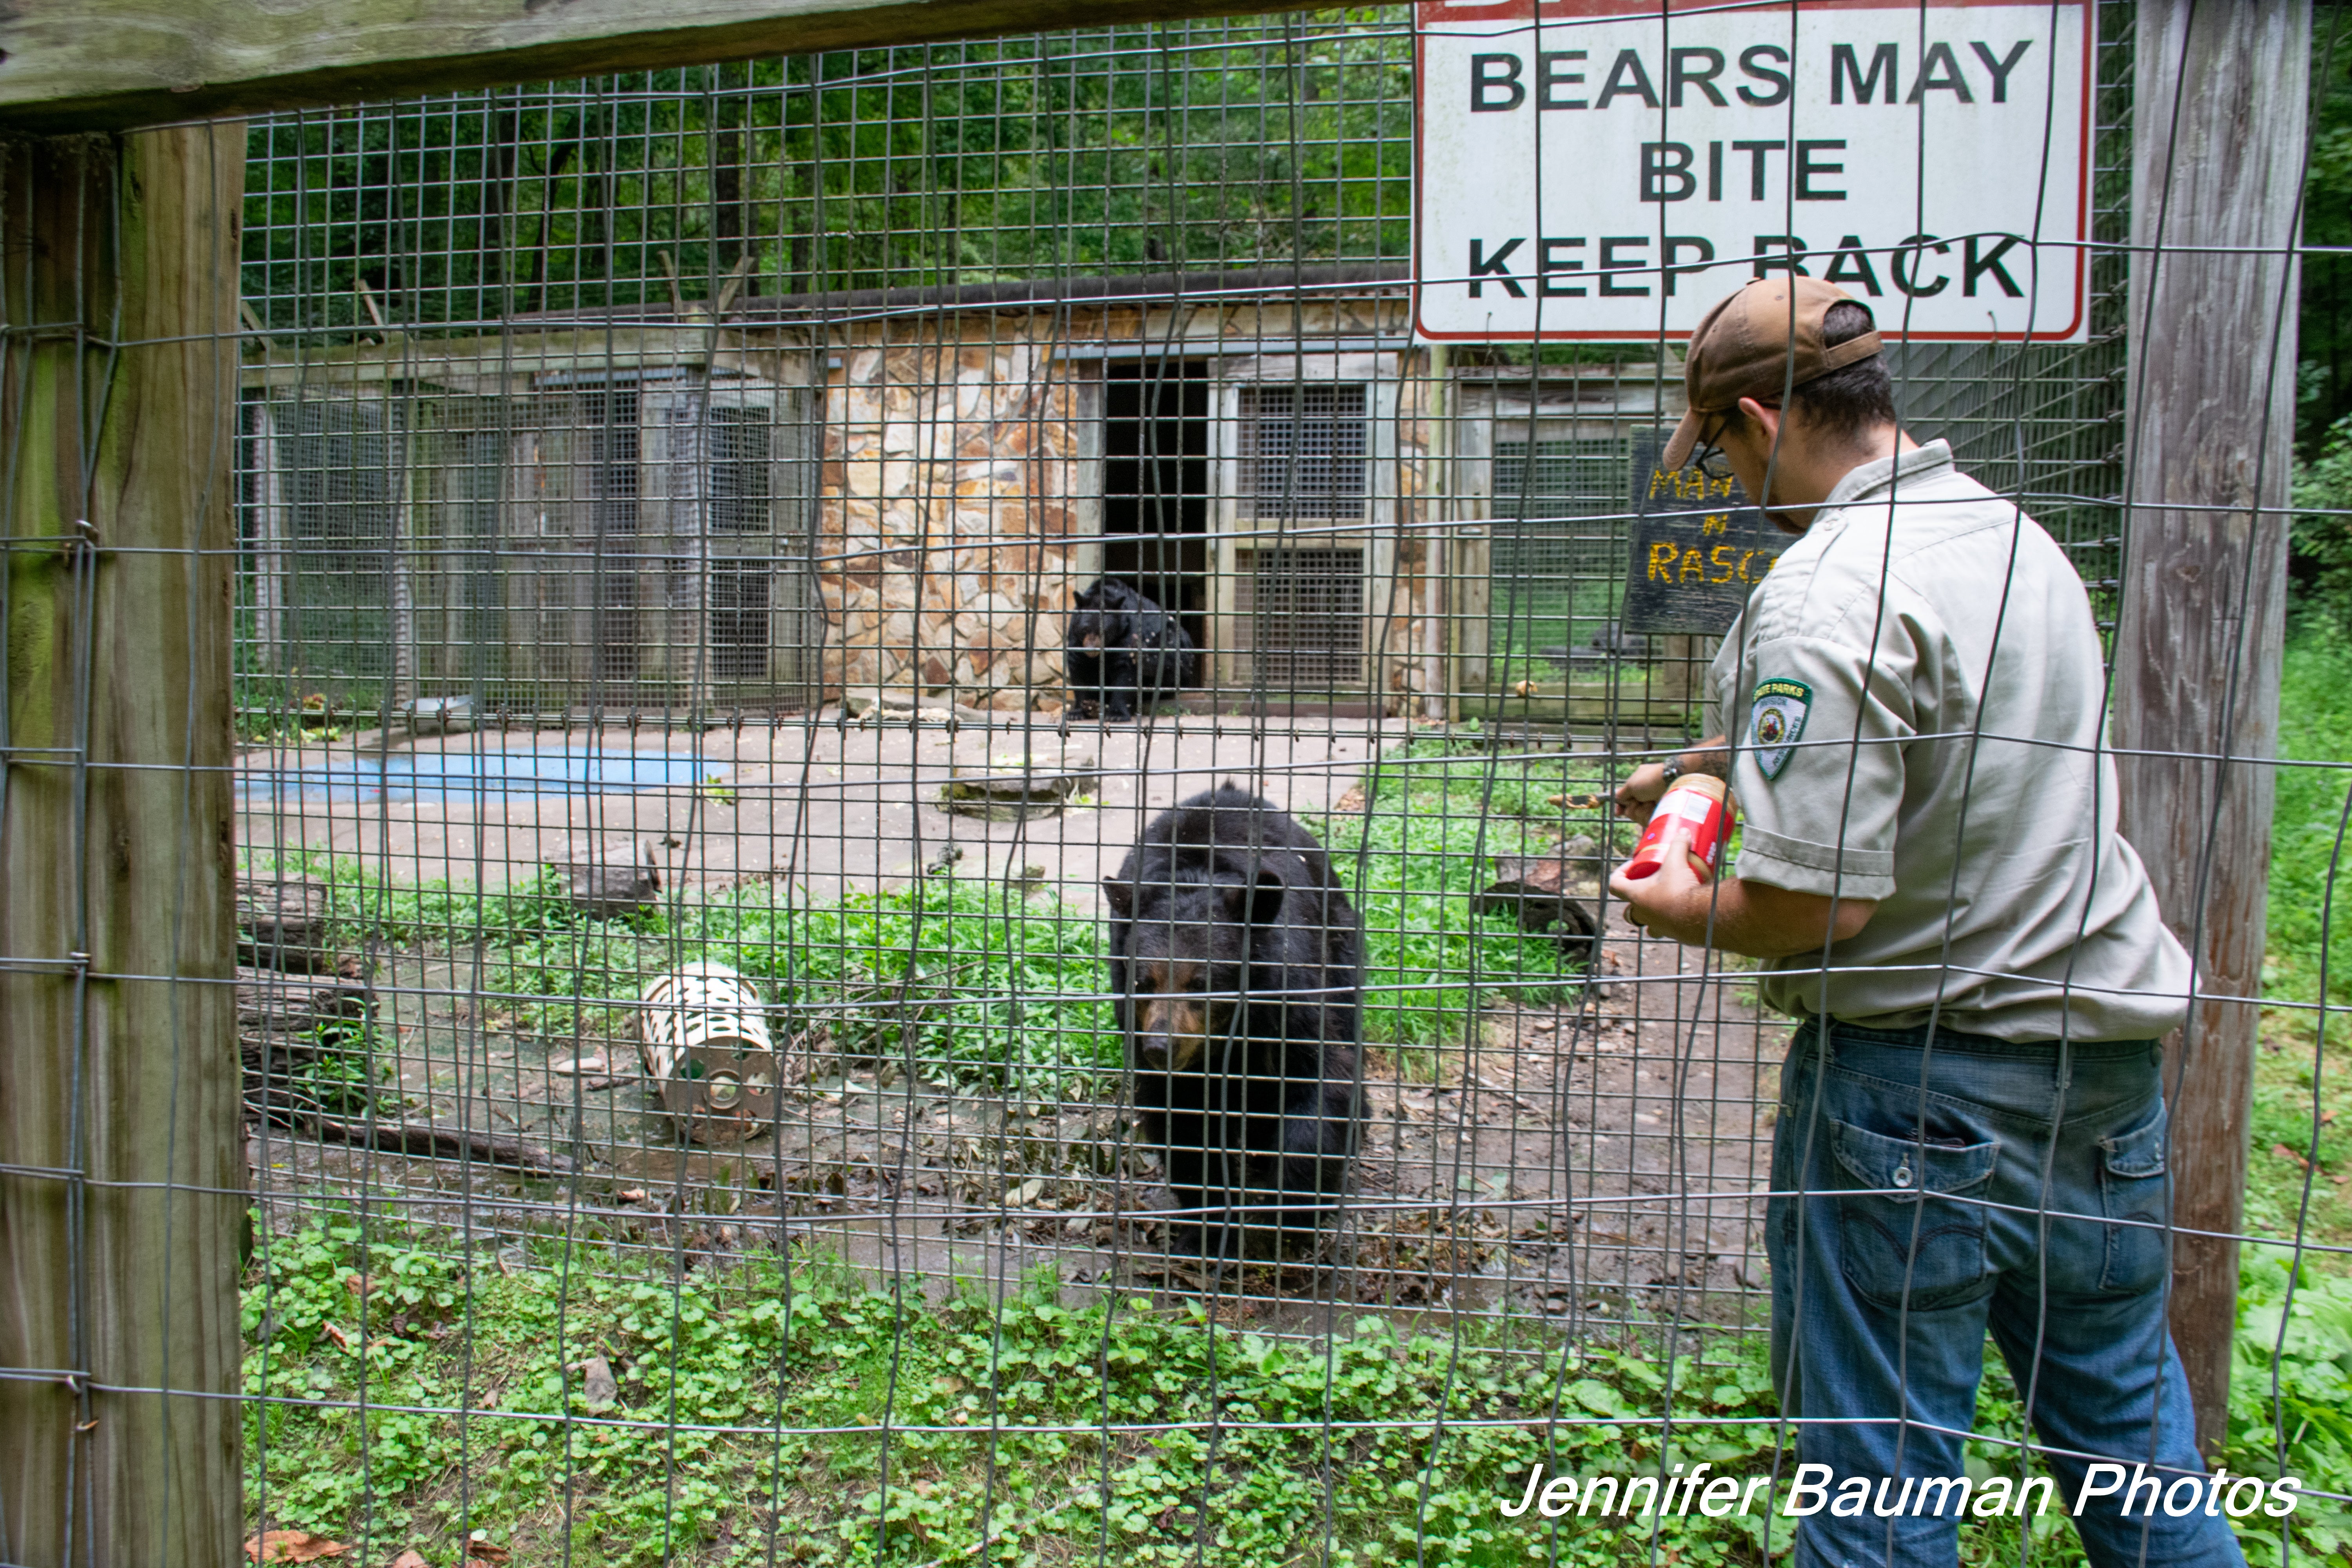 Caretaker putting honey and peanut butter on the bear enclosure.